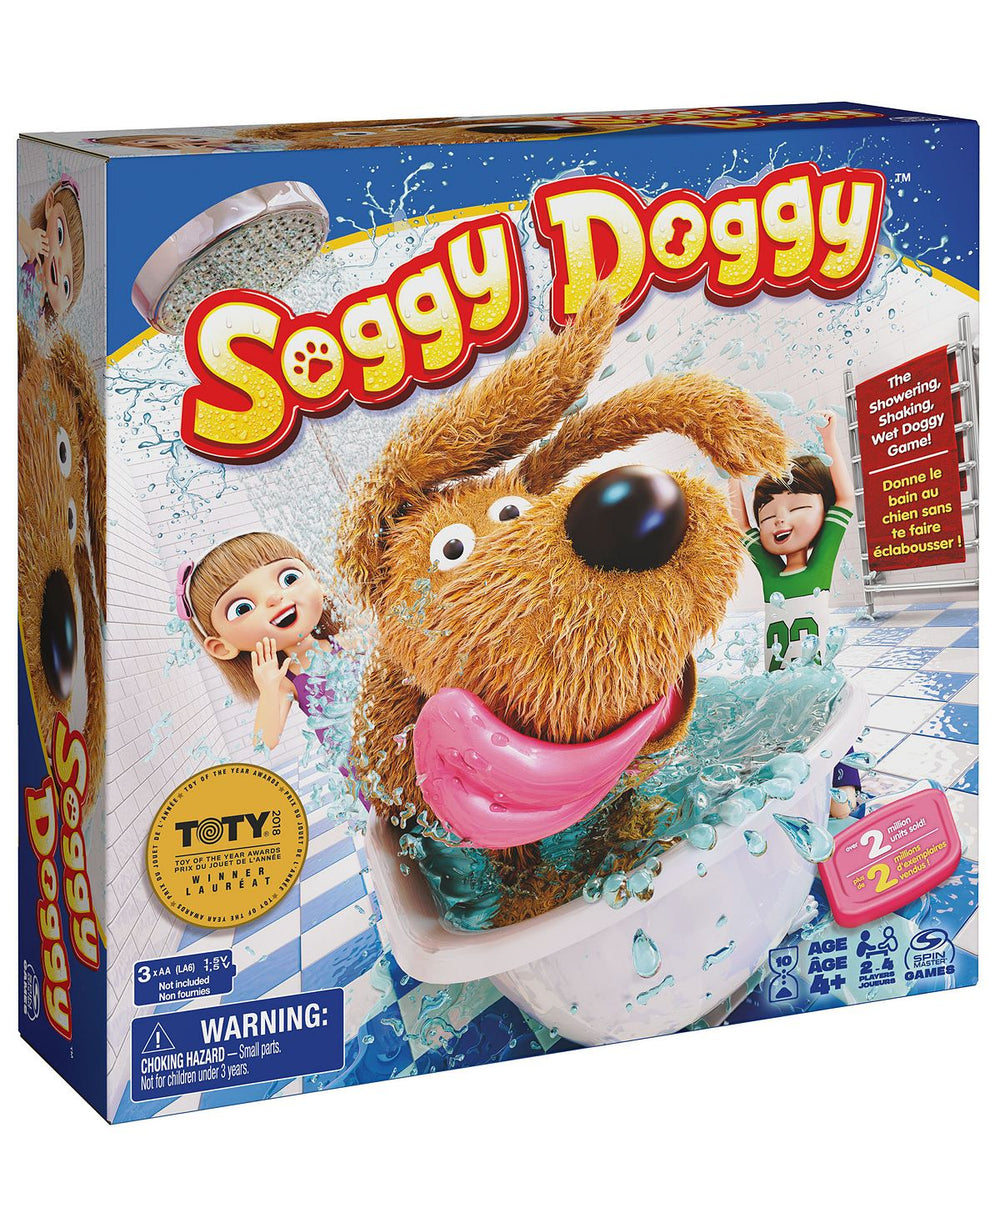 Soggy Doggy Interactive Bath Time Fun Board Game for Kids